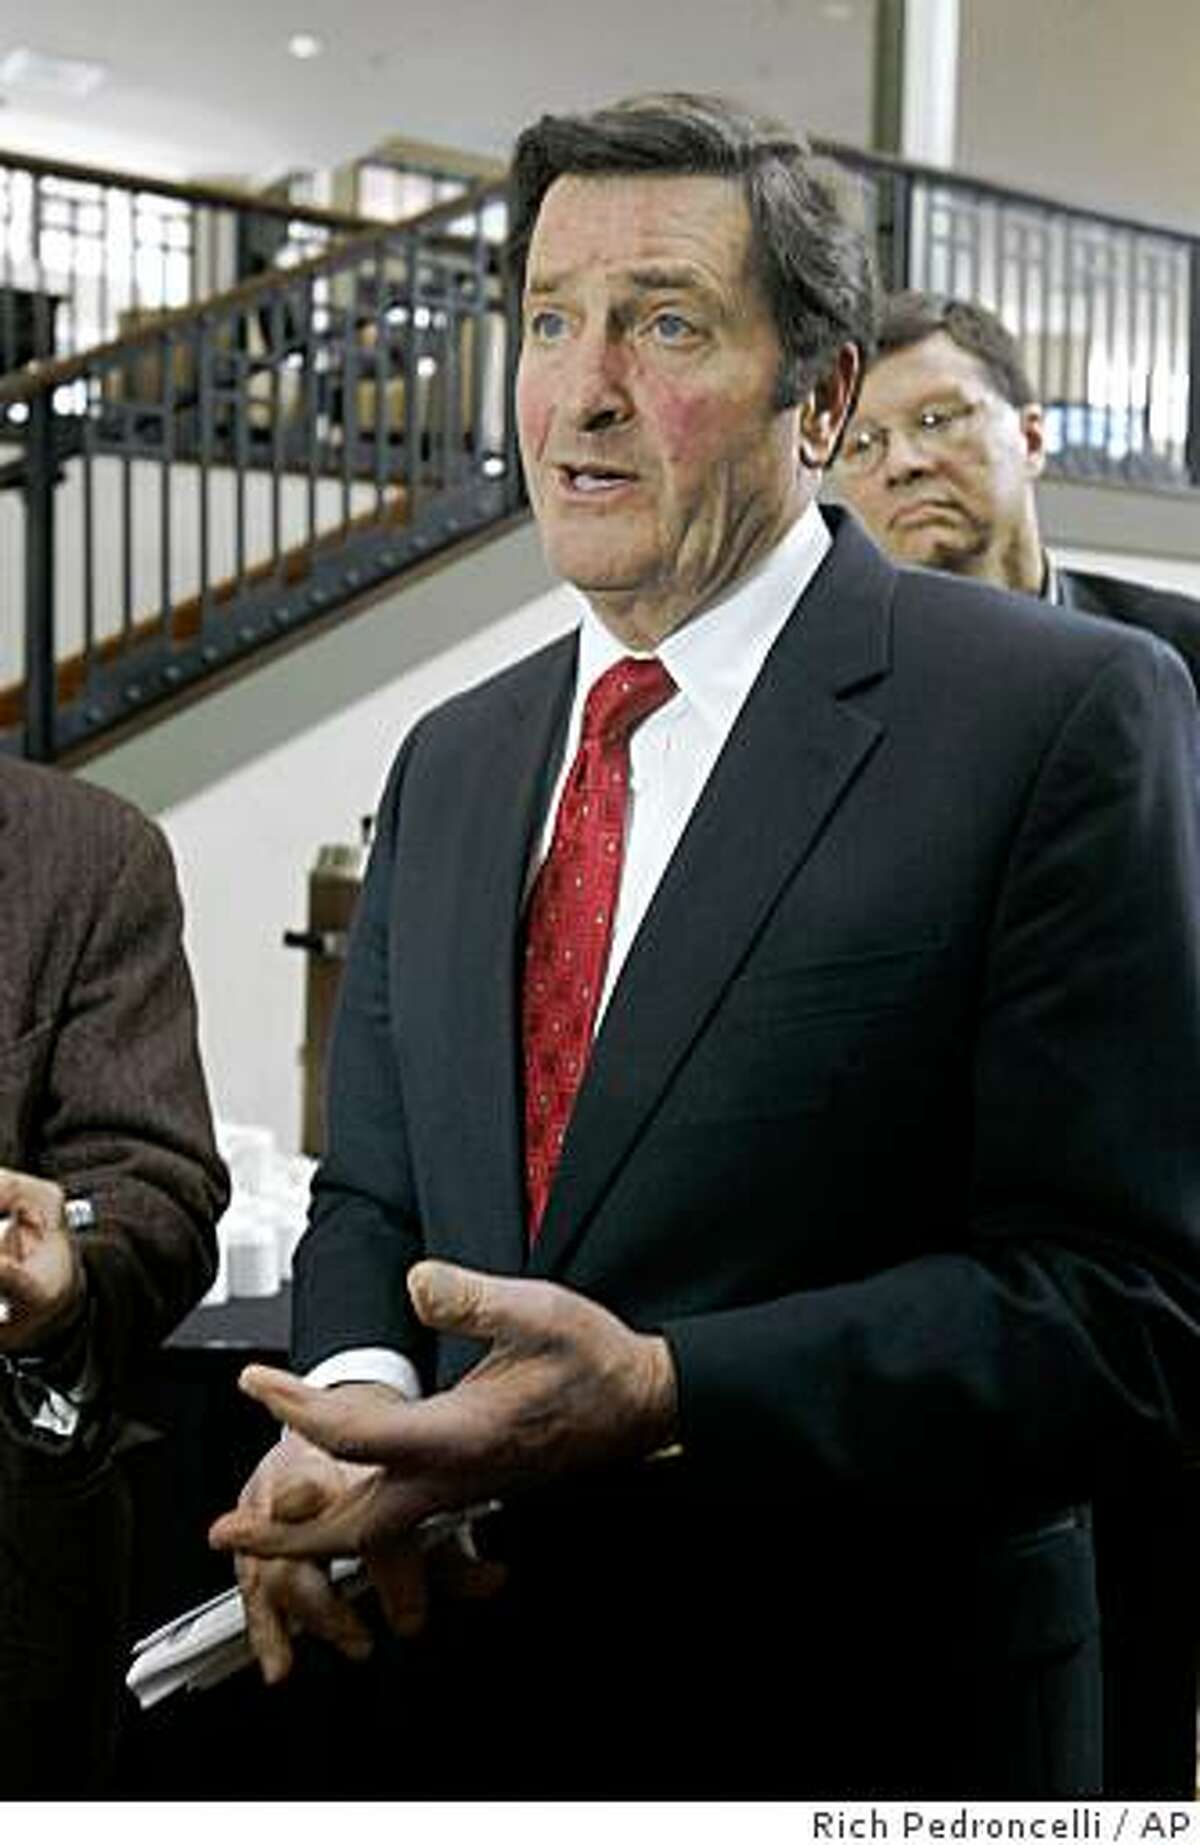 Lt. Gov. John Garamendi talks to reporters after appearing at a forum on ways to reform state government in Sacramento, Calif., Tuesday, Feb. 24, 2009. Delegates at the California Constitutional Convention Summit debated whether the the state Constitution should be completely rewritten. (AP Photo/Rich Pedroncelli)